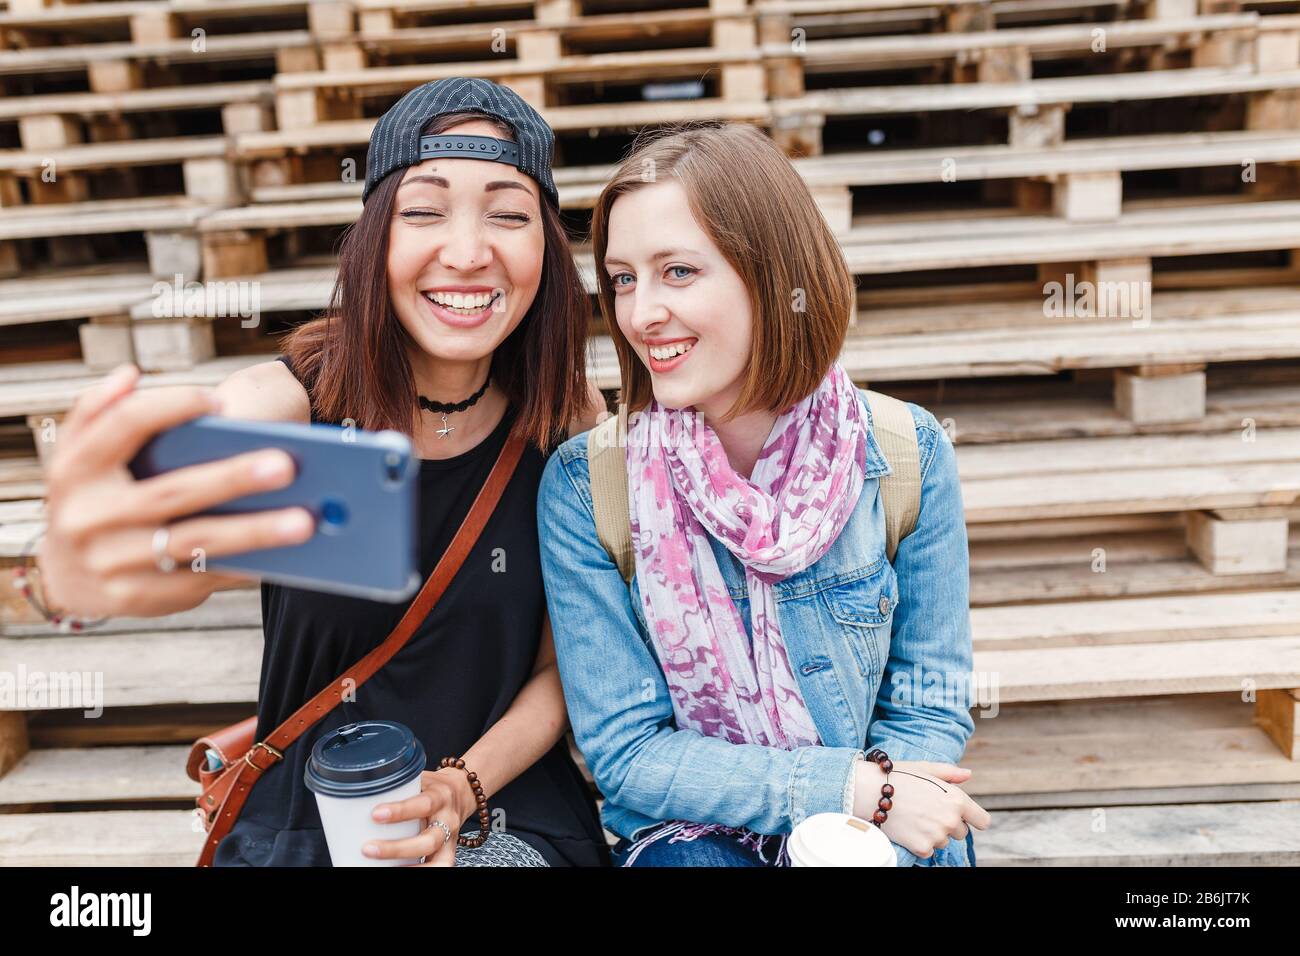 Two young girl students laugh and making selfie on a smartphone while walking outside and drinking coffee, the concept of friendship and fun Stock Photo